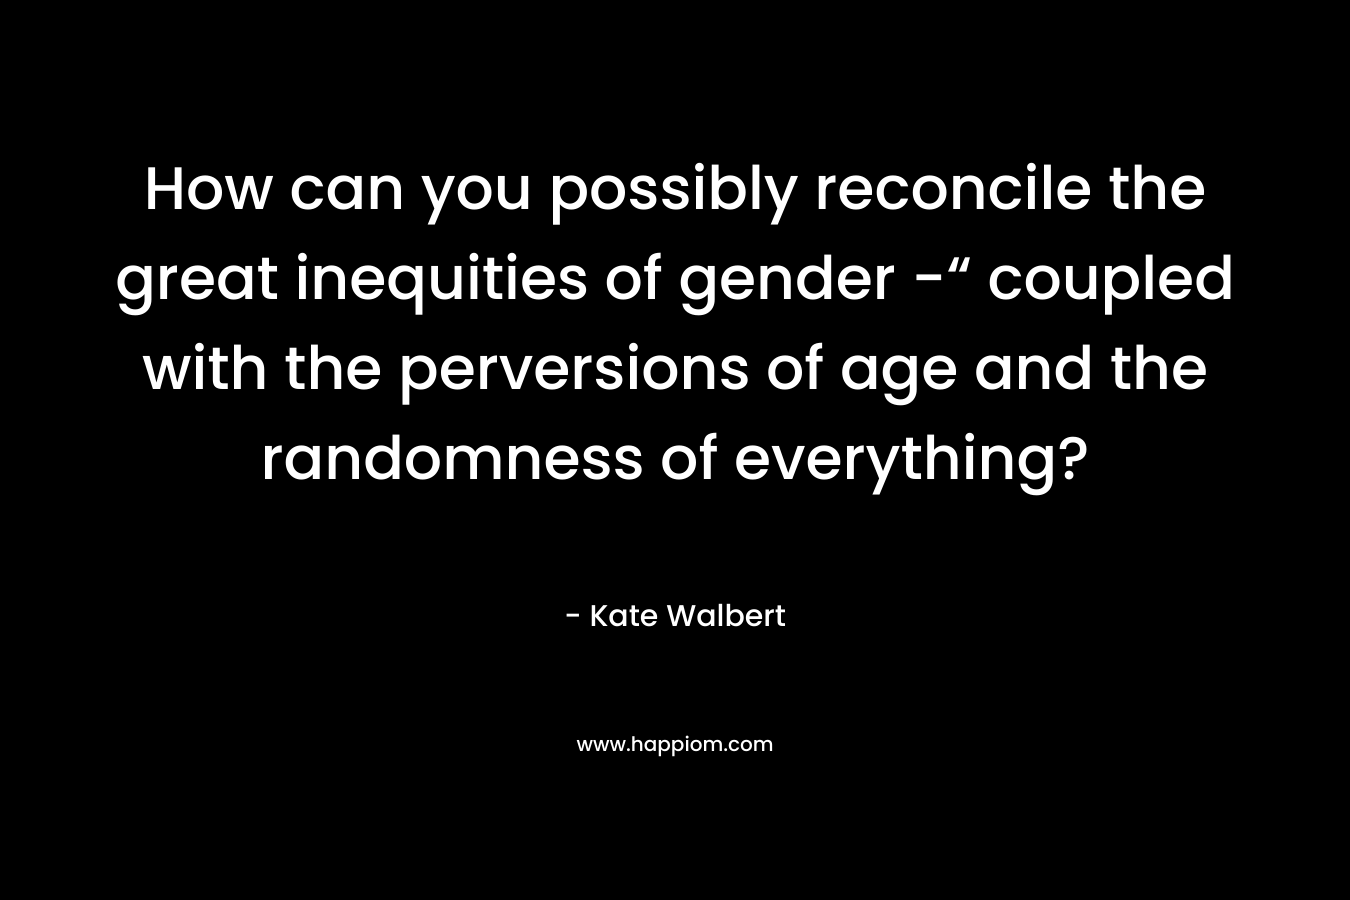 How can you possibly reconcile the great inequities of gender -“ coupled with the perversions of age and the randomness of everything? – Kate Walbert